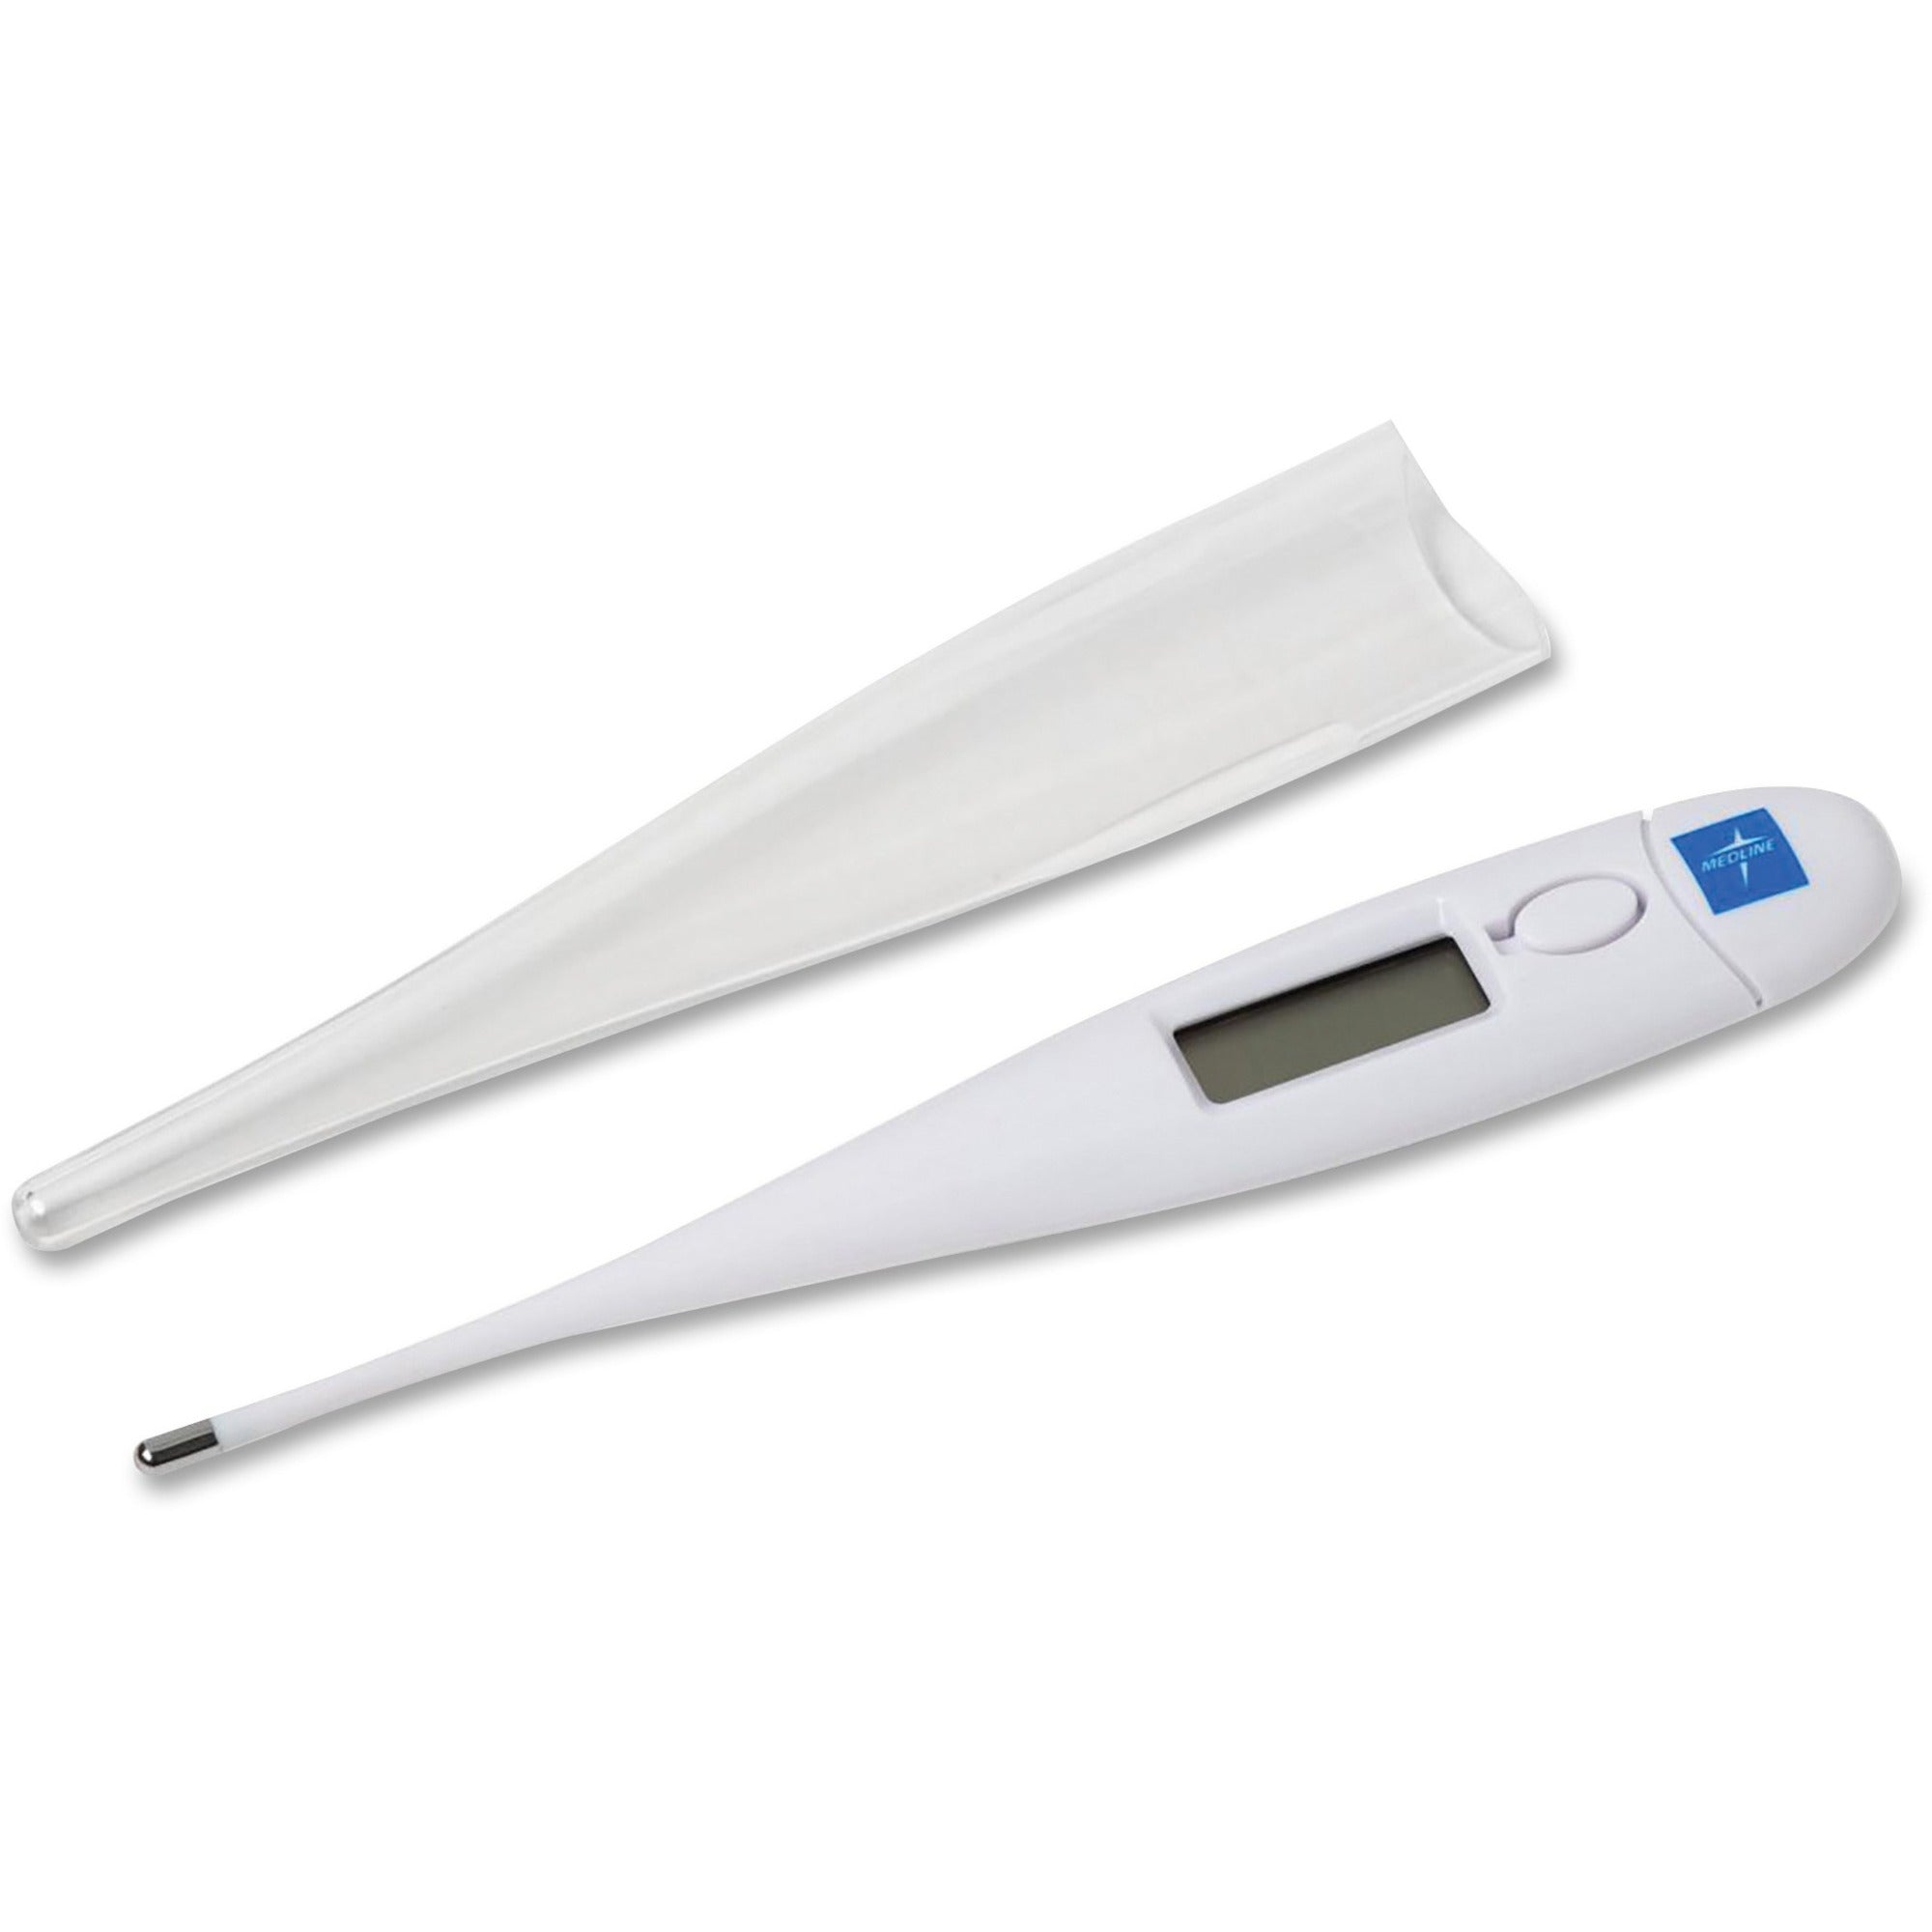 Medline Oral Digital Stick Thermometer - Reusable, Latex-free - For Oral - White - 